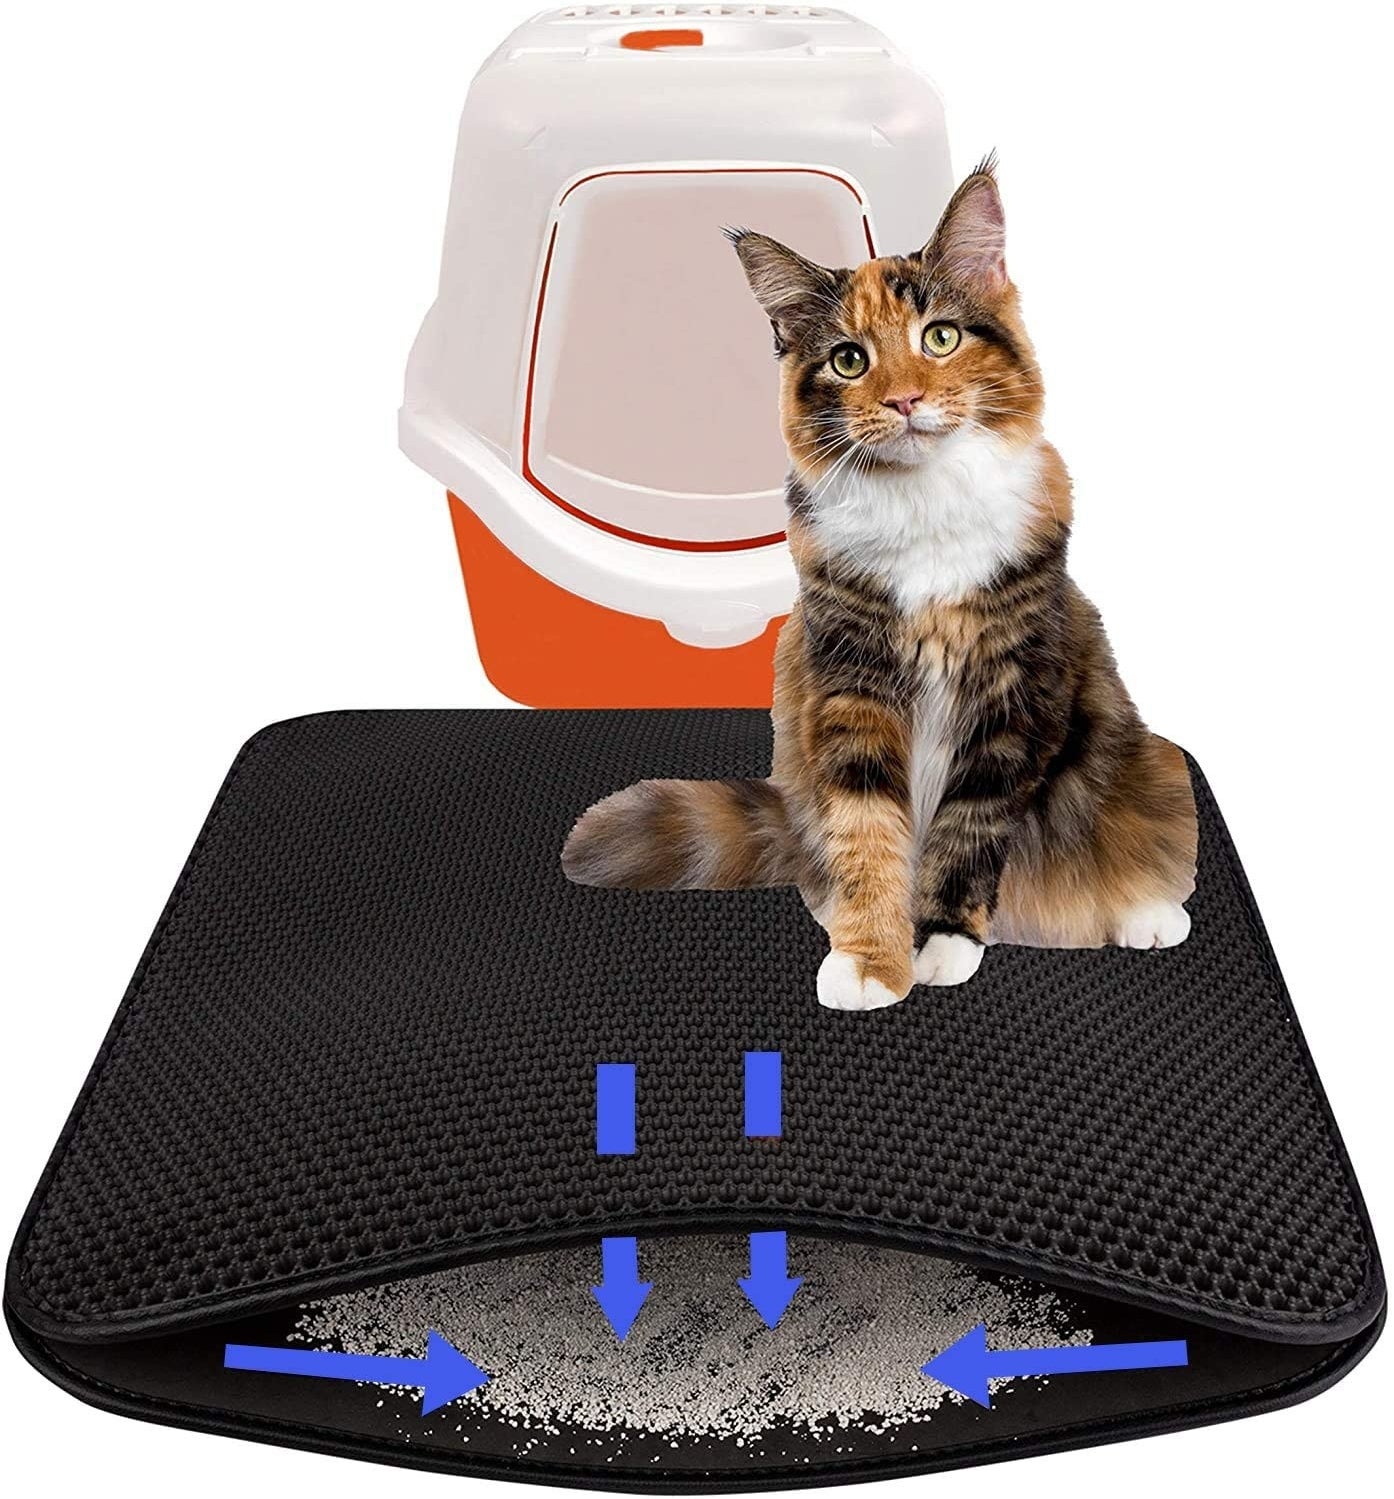 A cat sitting on top of a porous mat that&#x27;ll catch any spilt kitty litter 